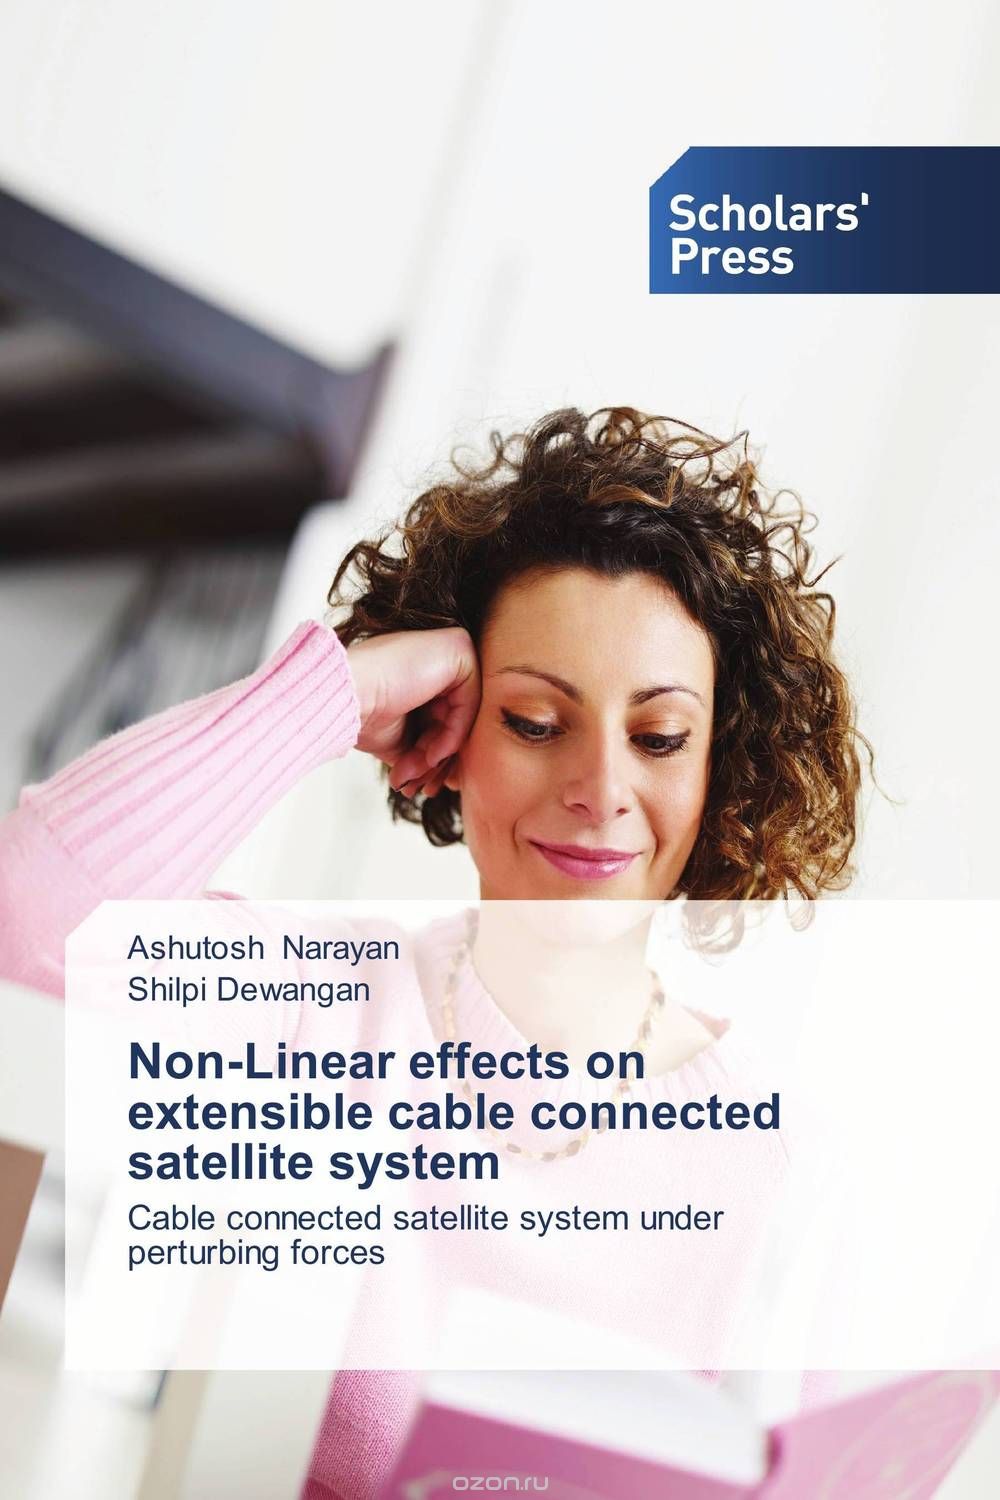 Скачать книгу "Non-Linear effects on extensible cable connected satellite system"